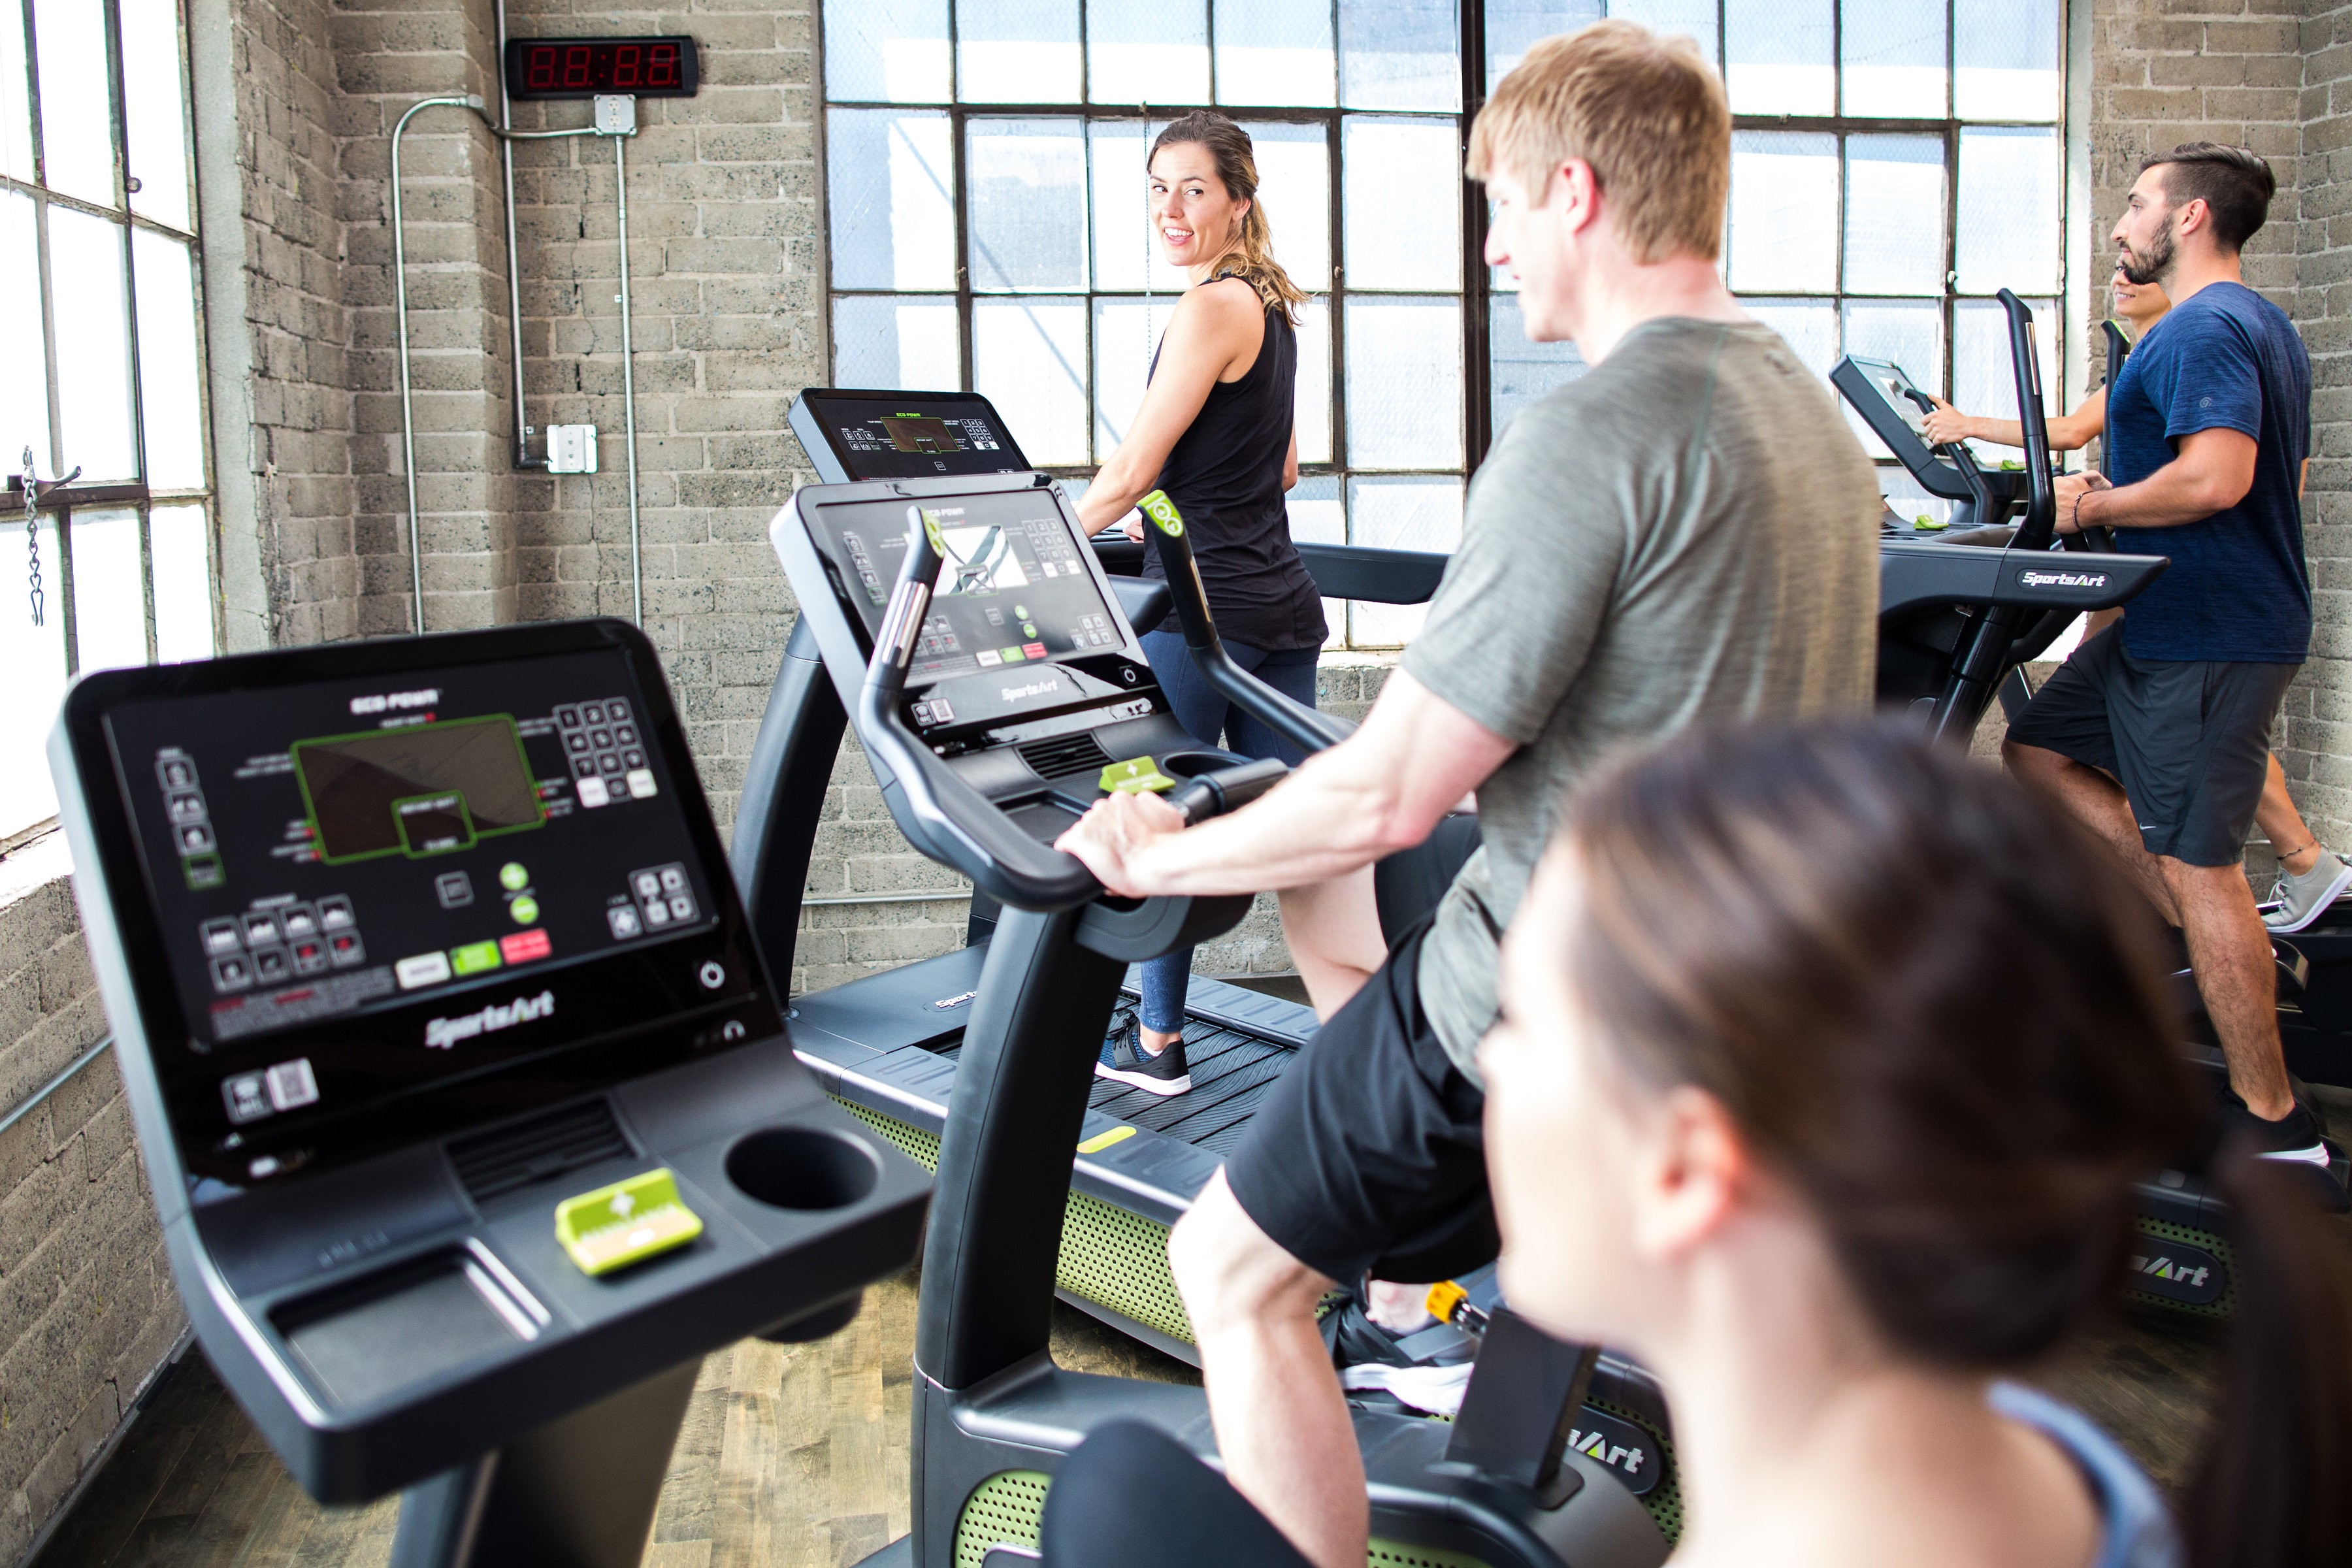 Human-powered gym machines are the latest eco trend in the fitness industry. Photo: SportsArt